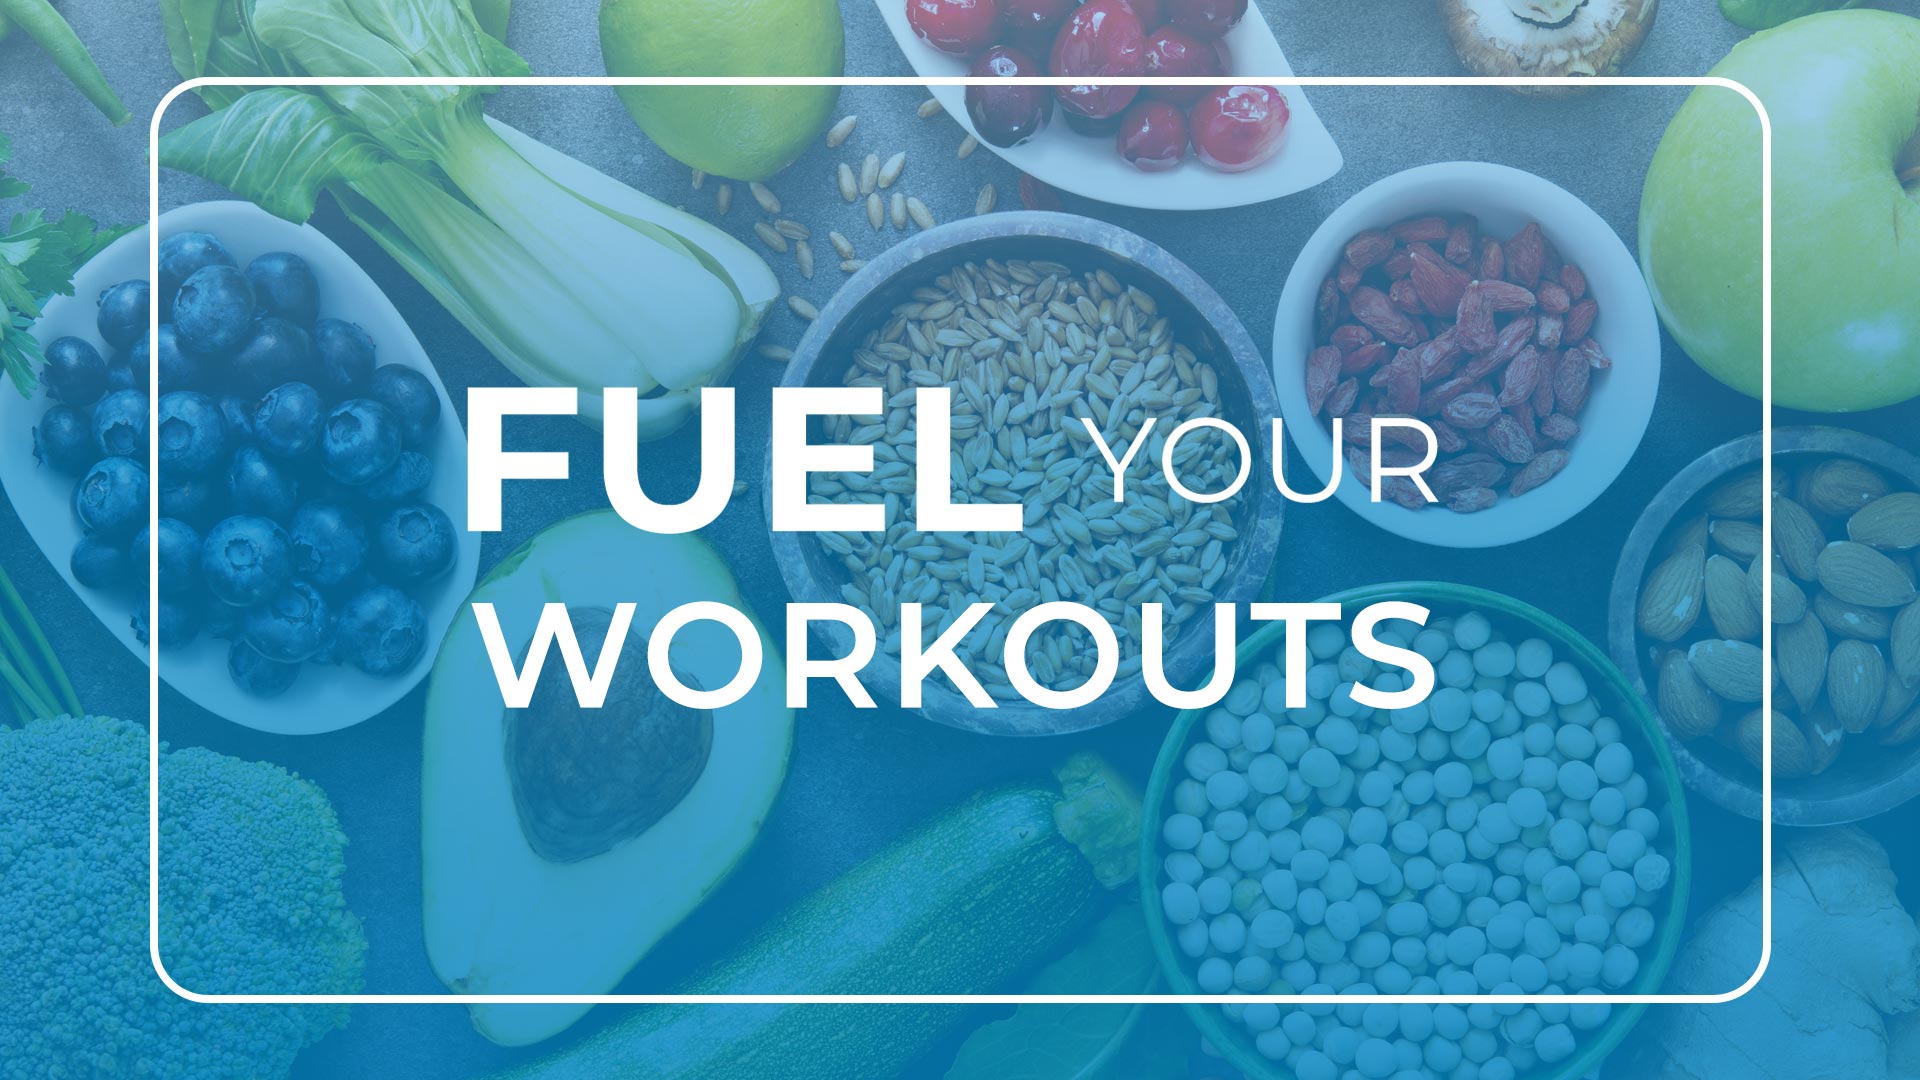 Nutrition & Health - How to fuel your workouts